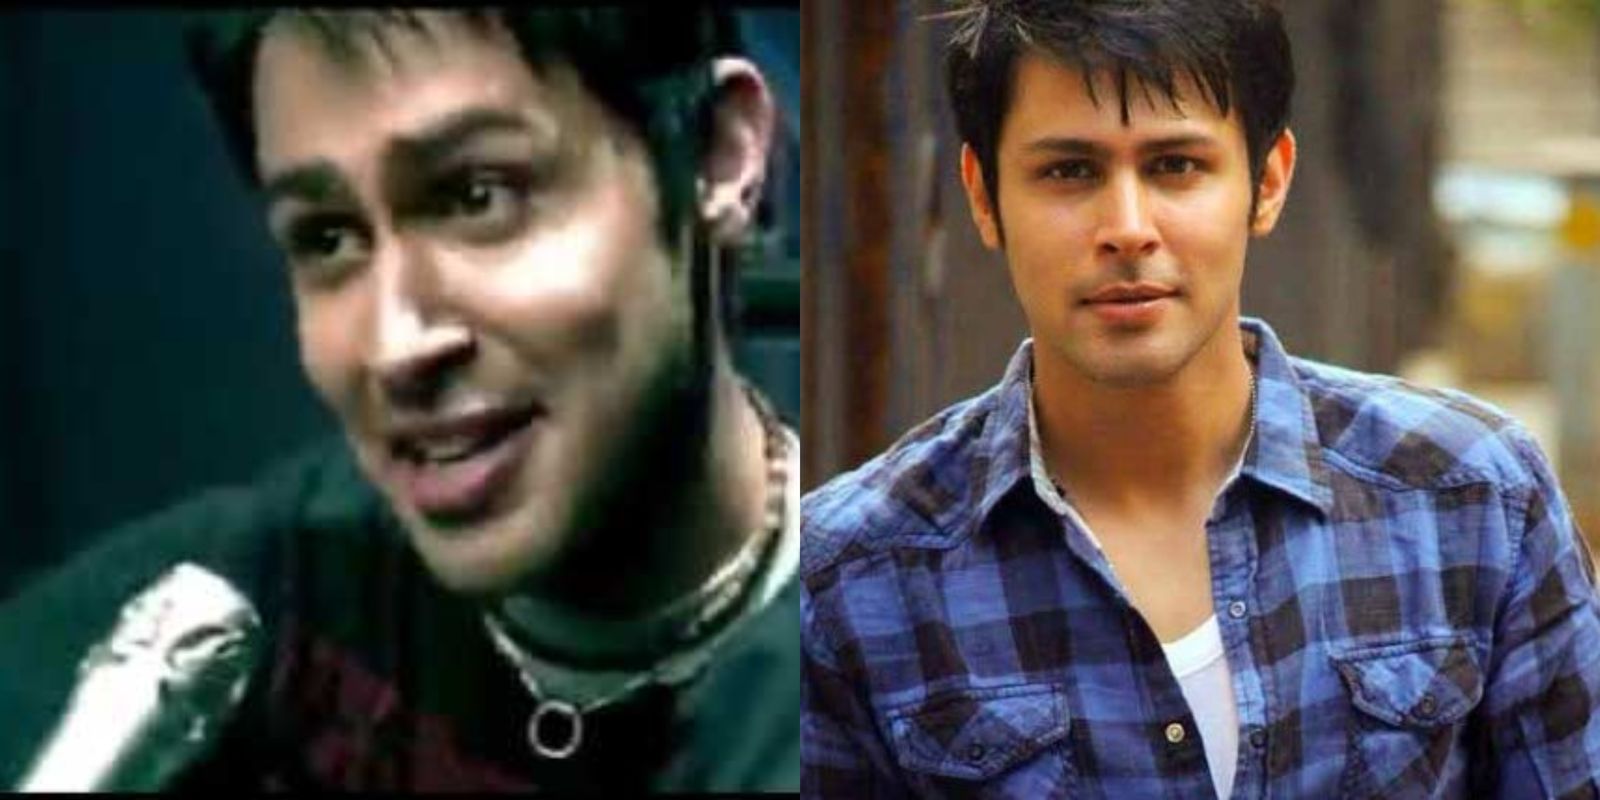 Exclusive: Ssudeep Sahir Reminisces He Didn't Want To Star In His Claim To Fame Music Video Channa Ve, Did It To Pay Rent